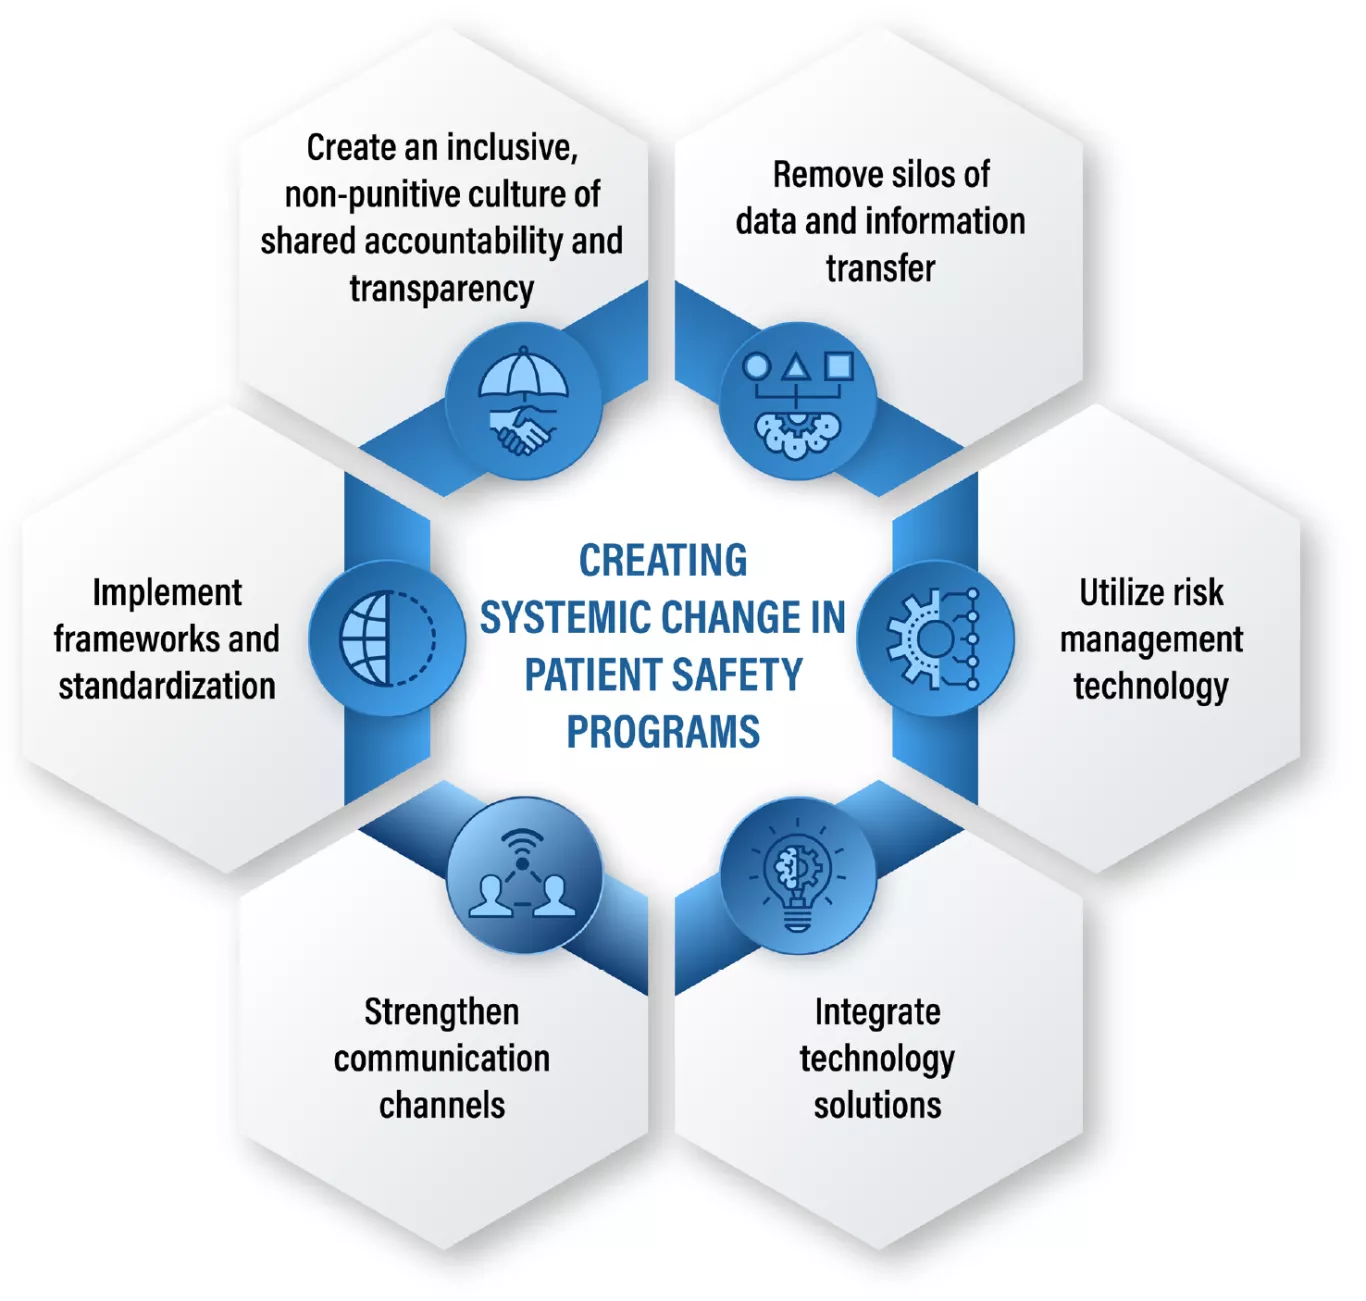 6 hexagonal shapes listing recommendations for creating systemic change in patient safety programs